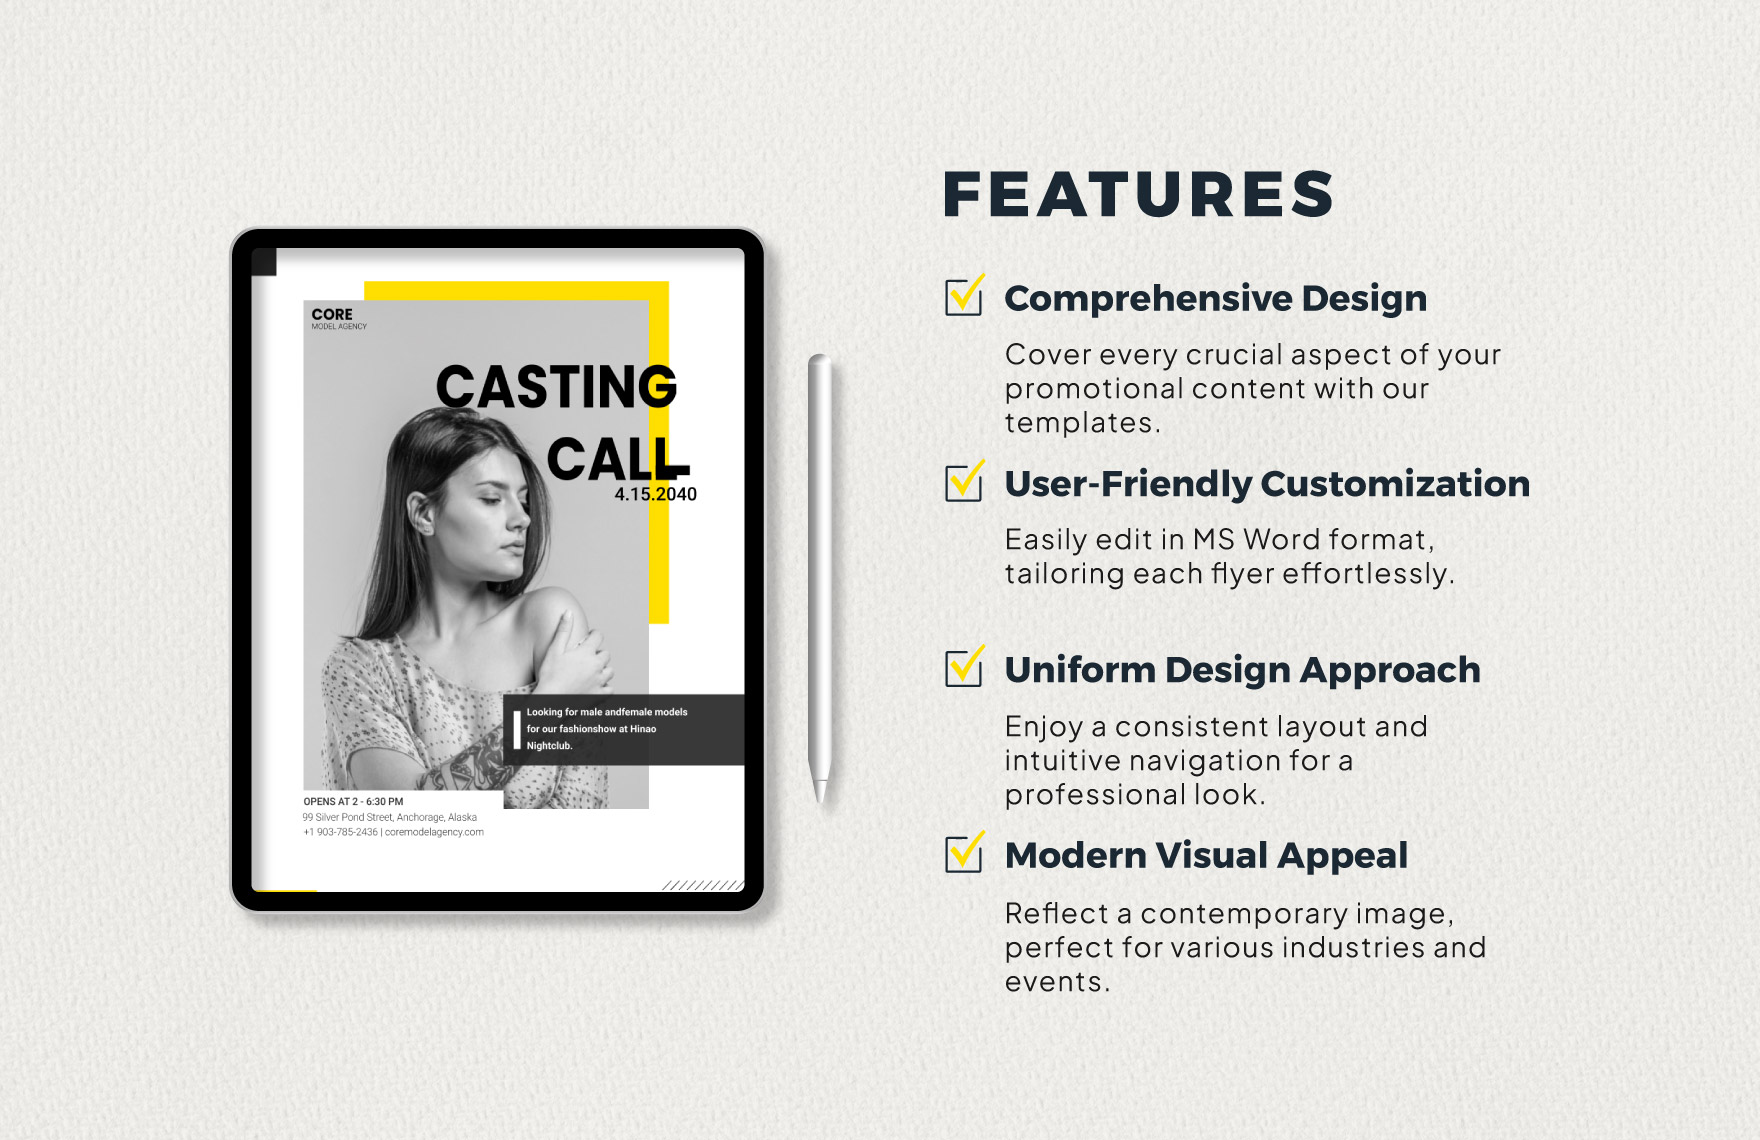 Professional Model Agency Flyer Template